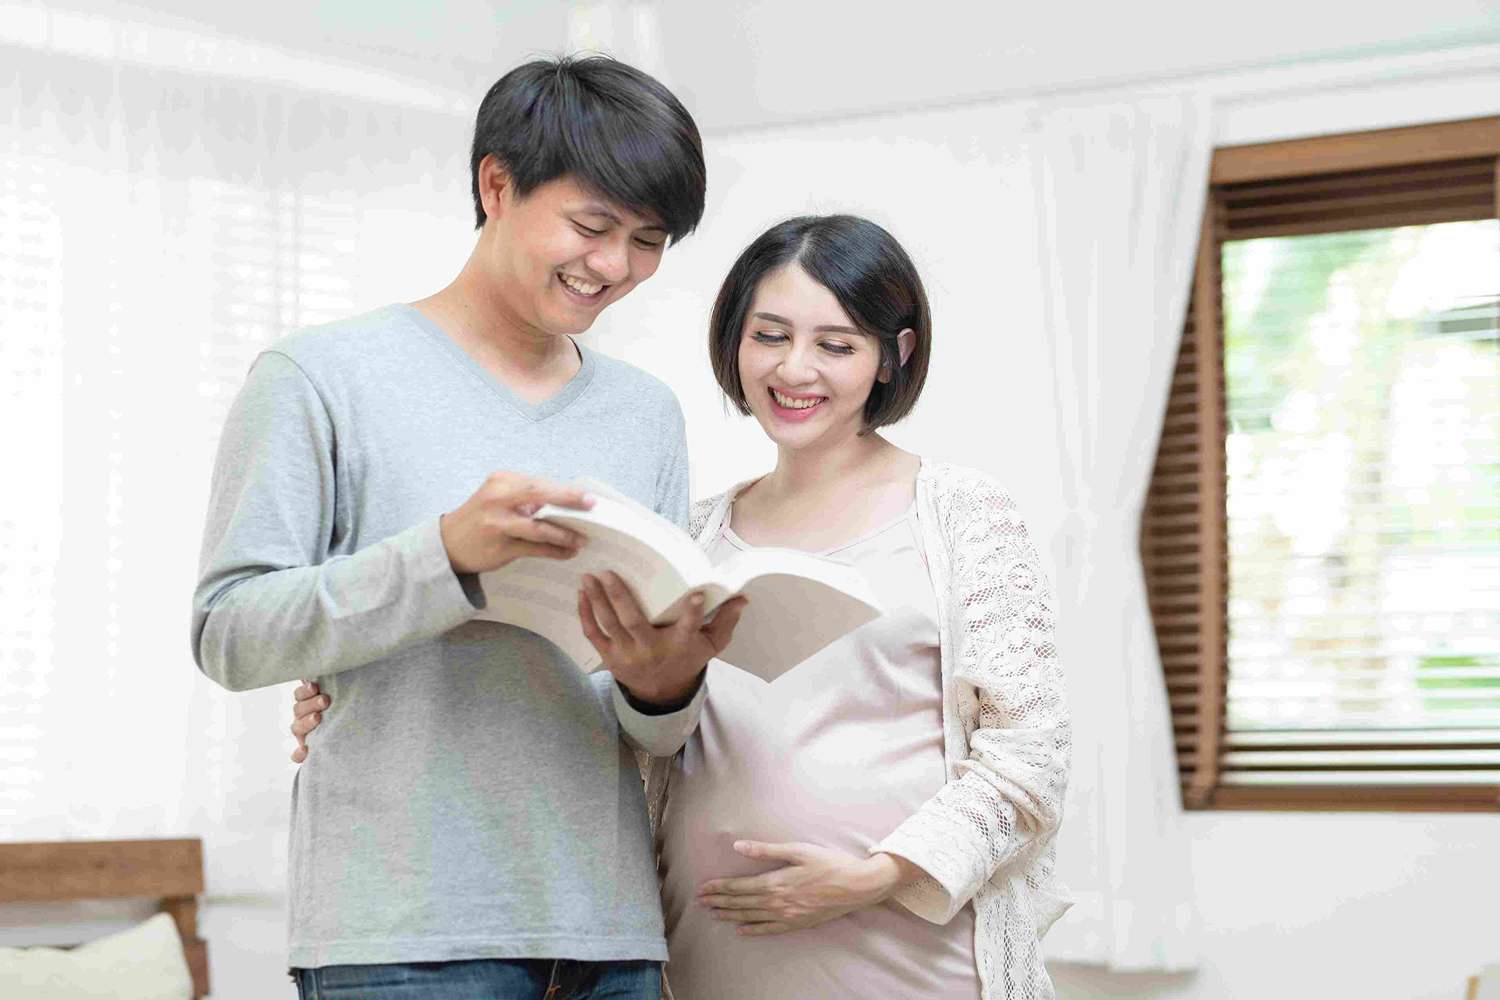 How to Choose Pregnancy and Parenting Books?